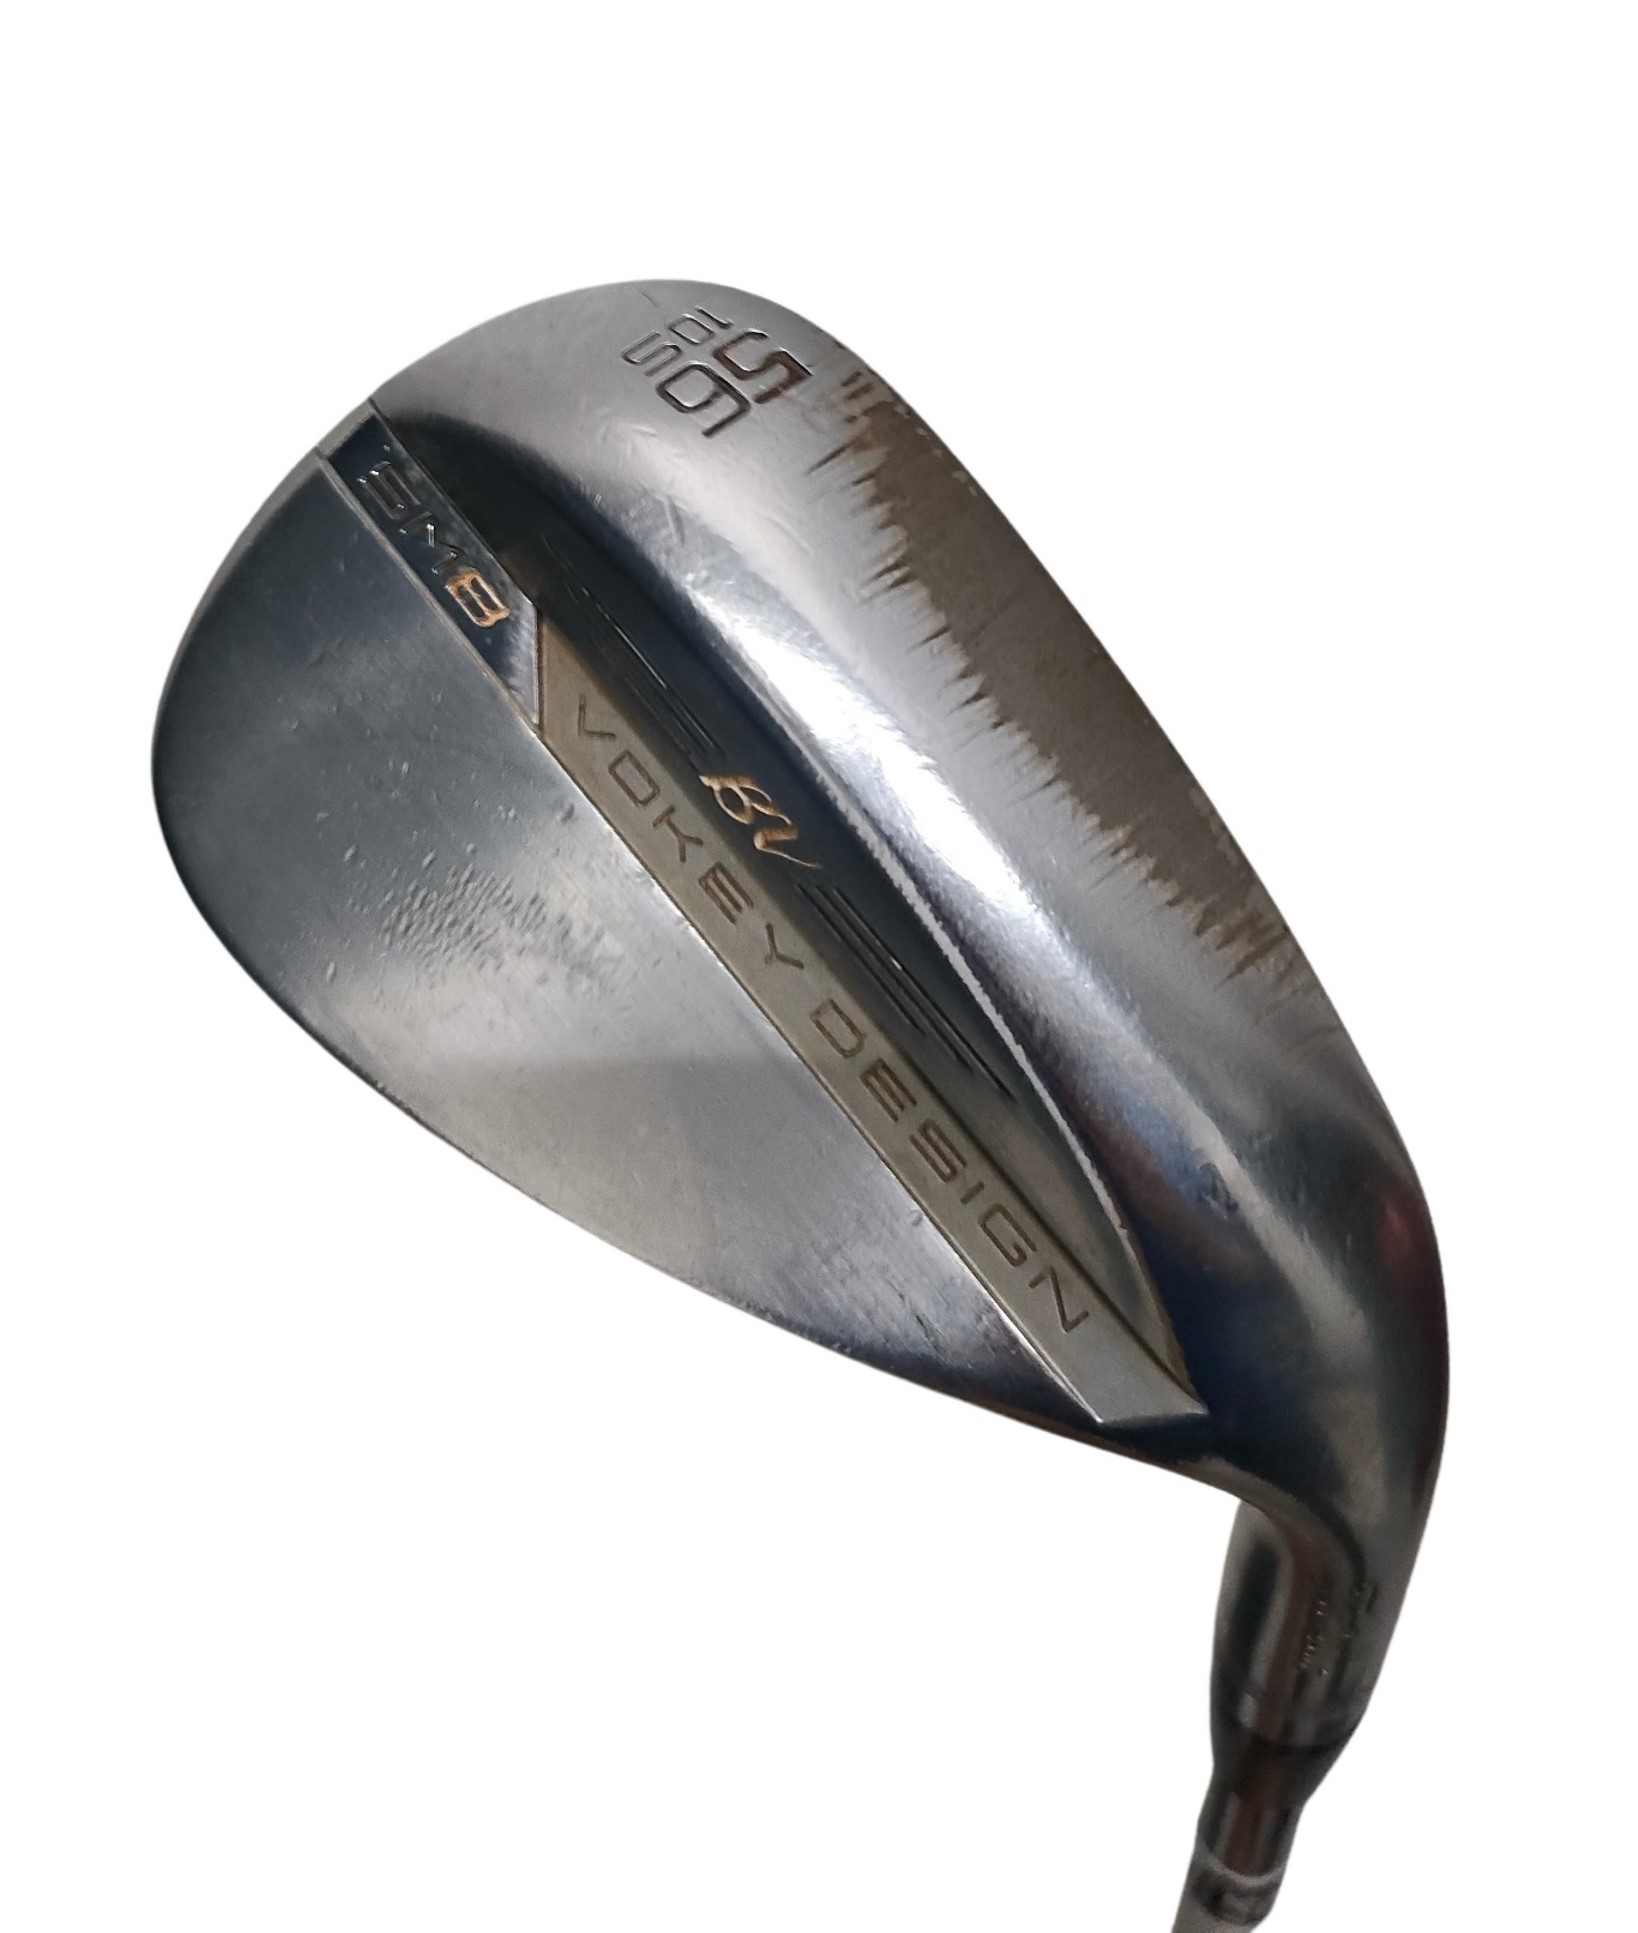 Pre-owned Titleist SM8 Men's Wedge